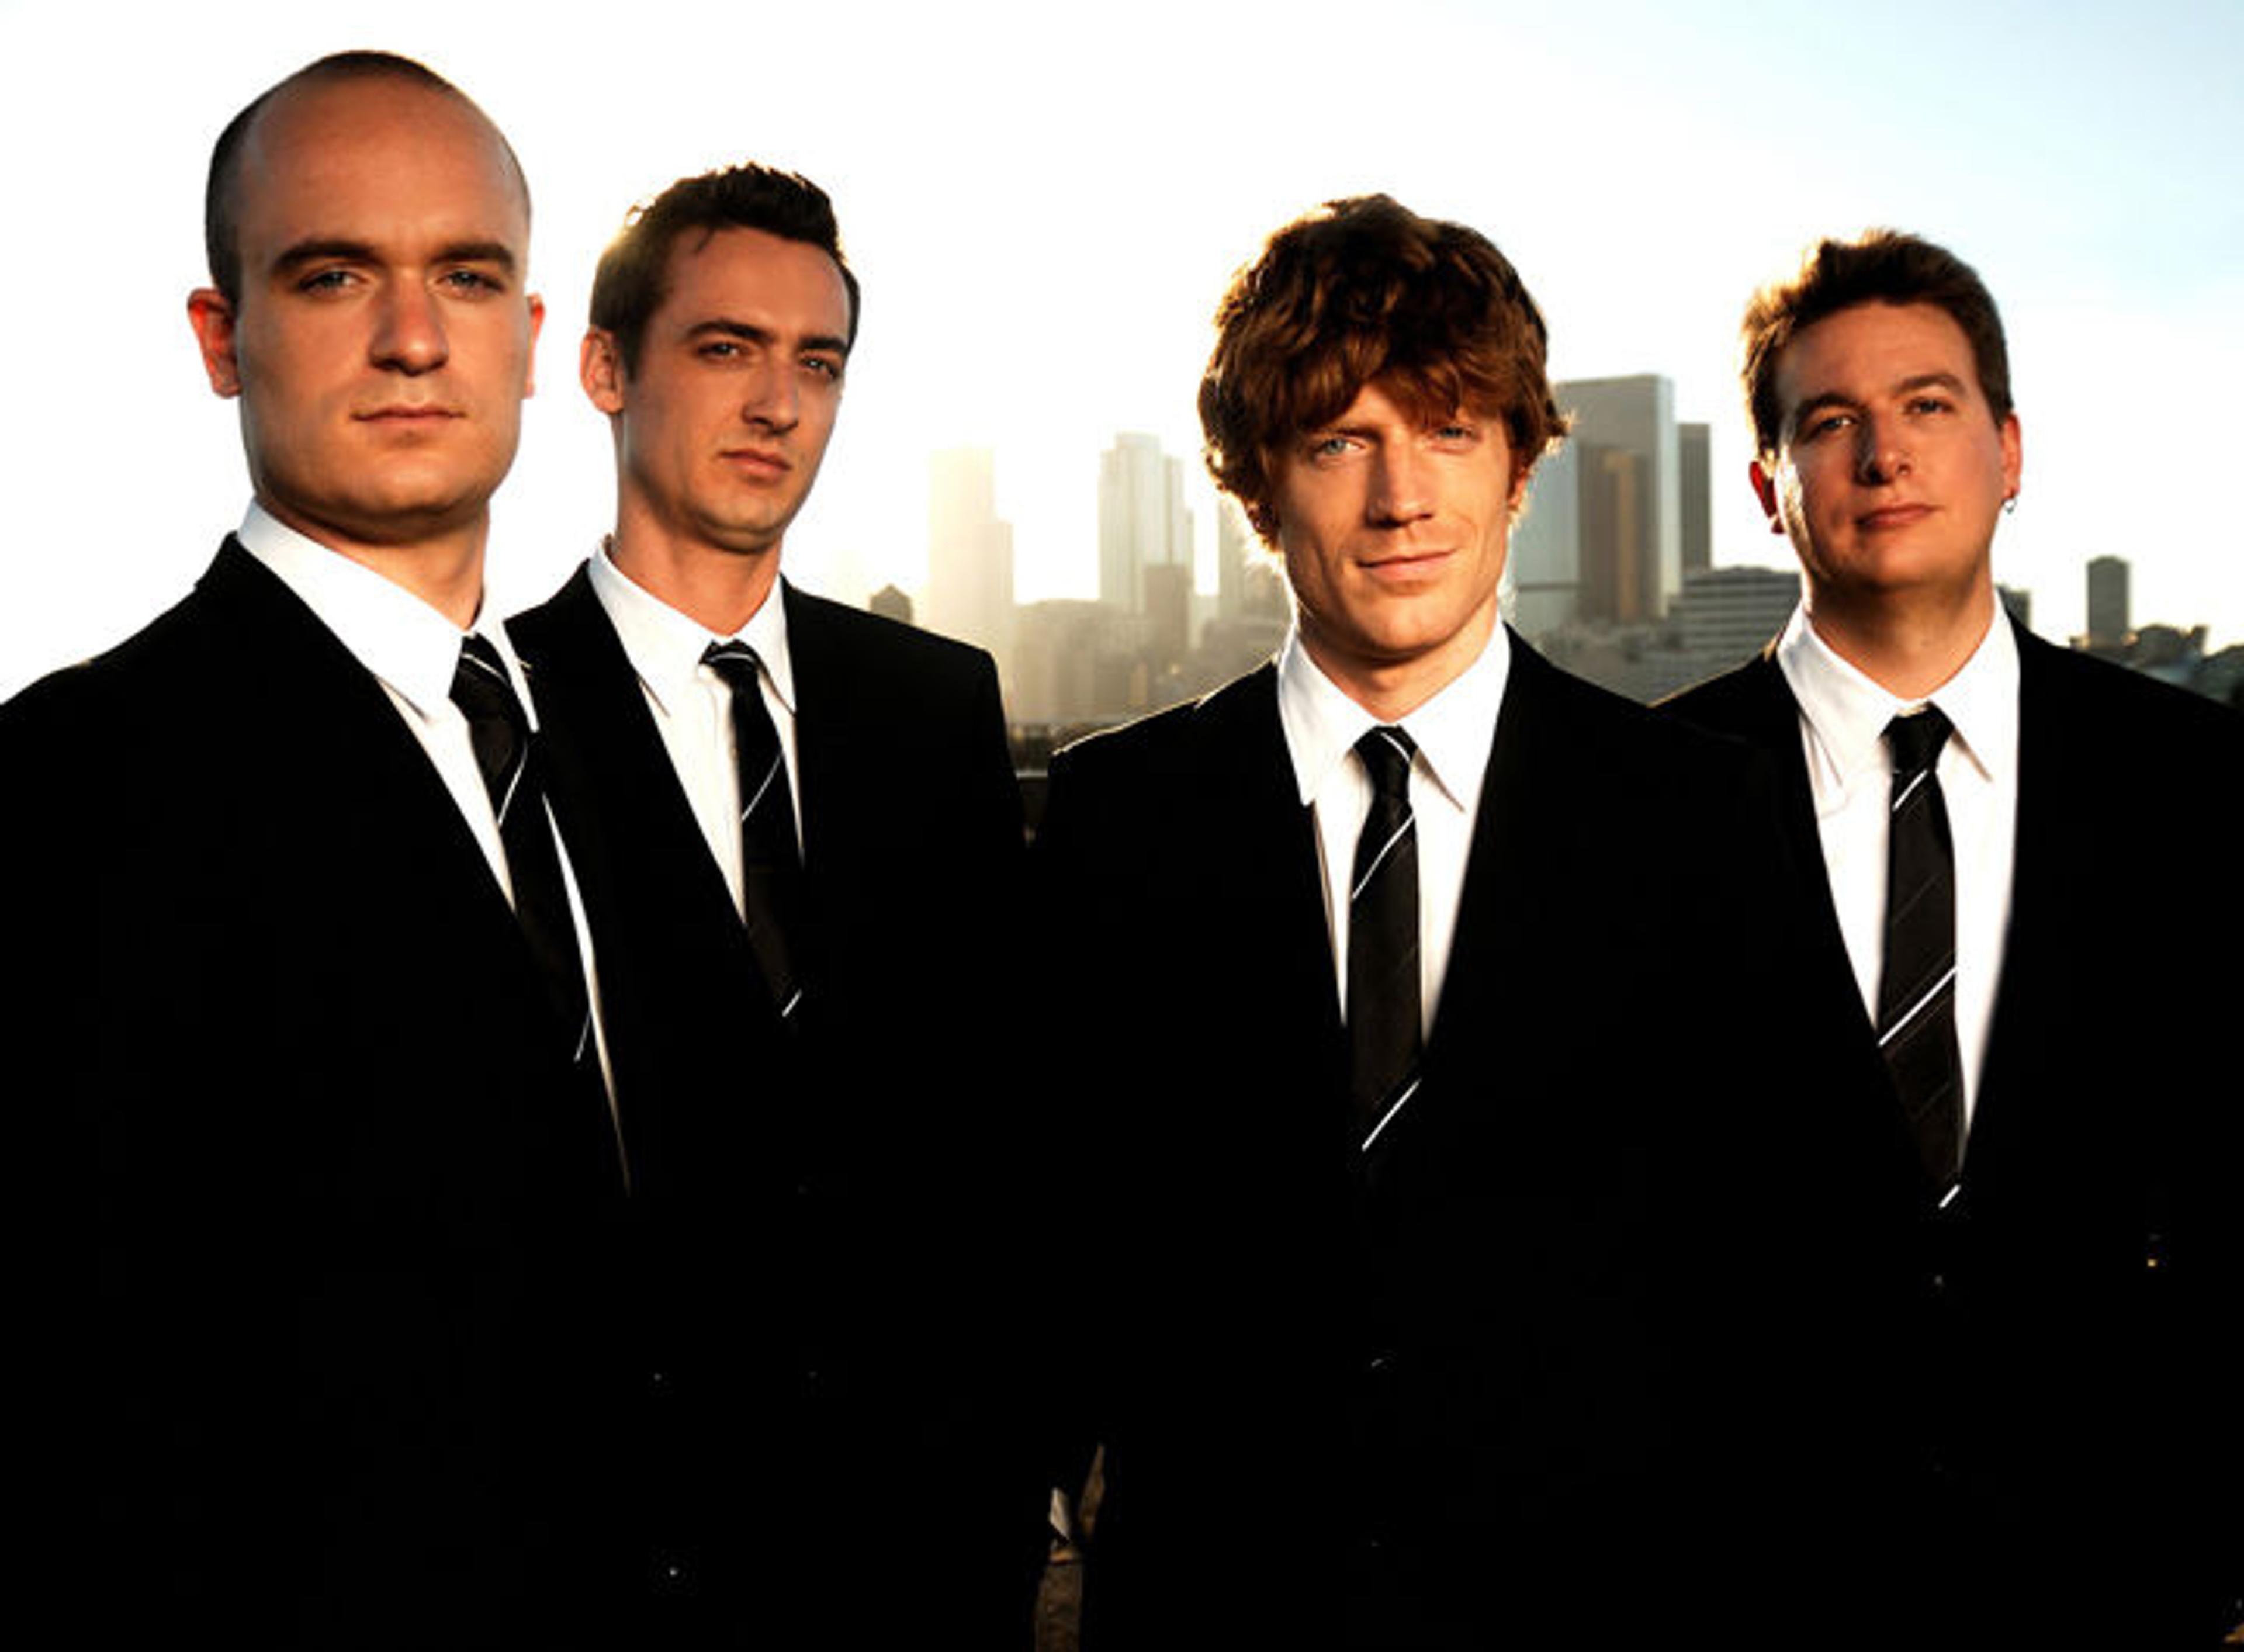 The four members of the Calder Quartet in black suits against an urban skyline